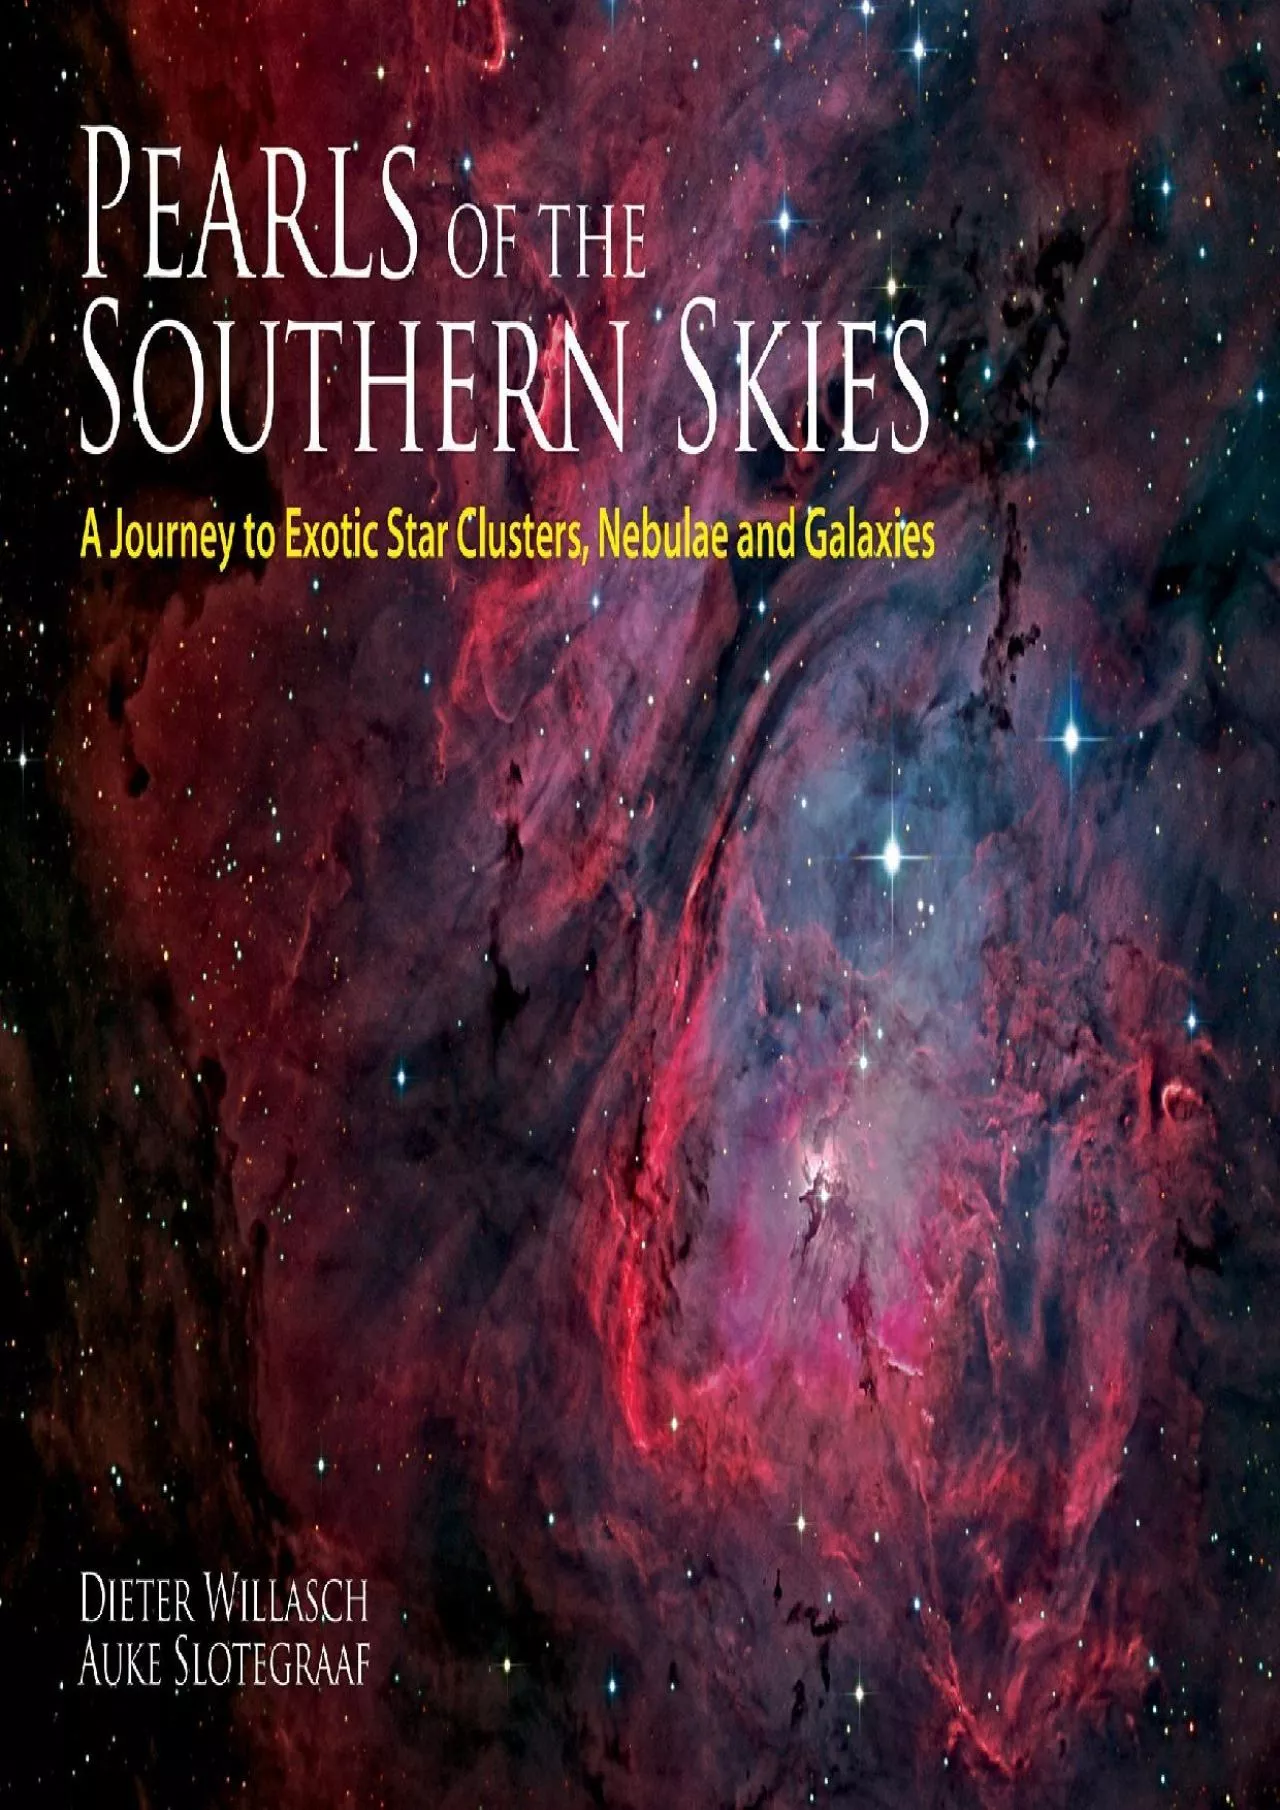 (DOWNLOAD)-Pearls of the Southern Skies: A Journey to Exotic Star Clusters, Nebulae and